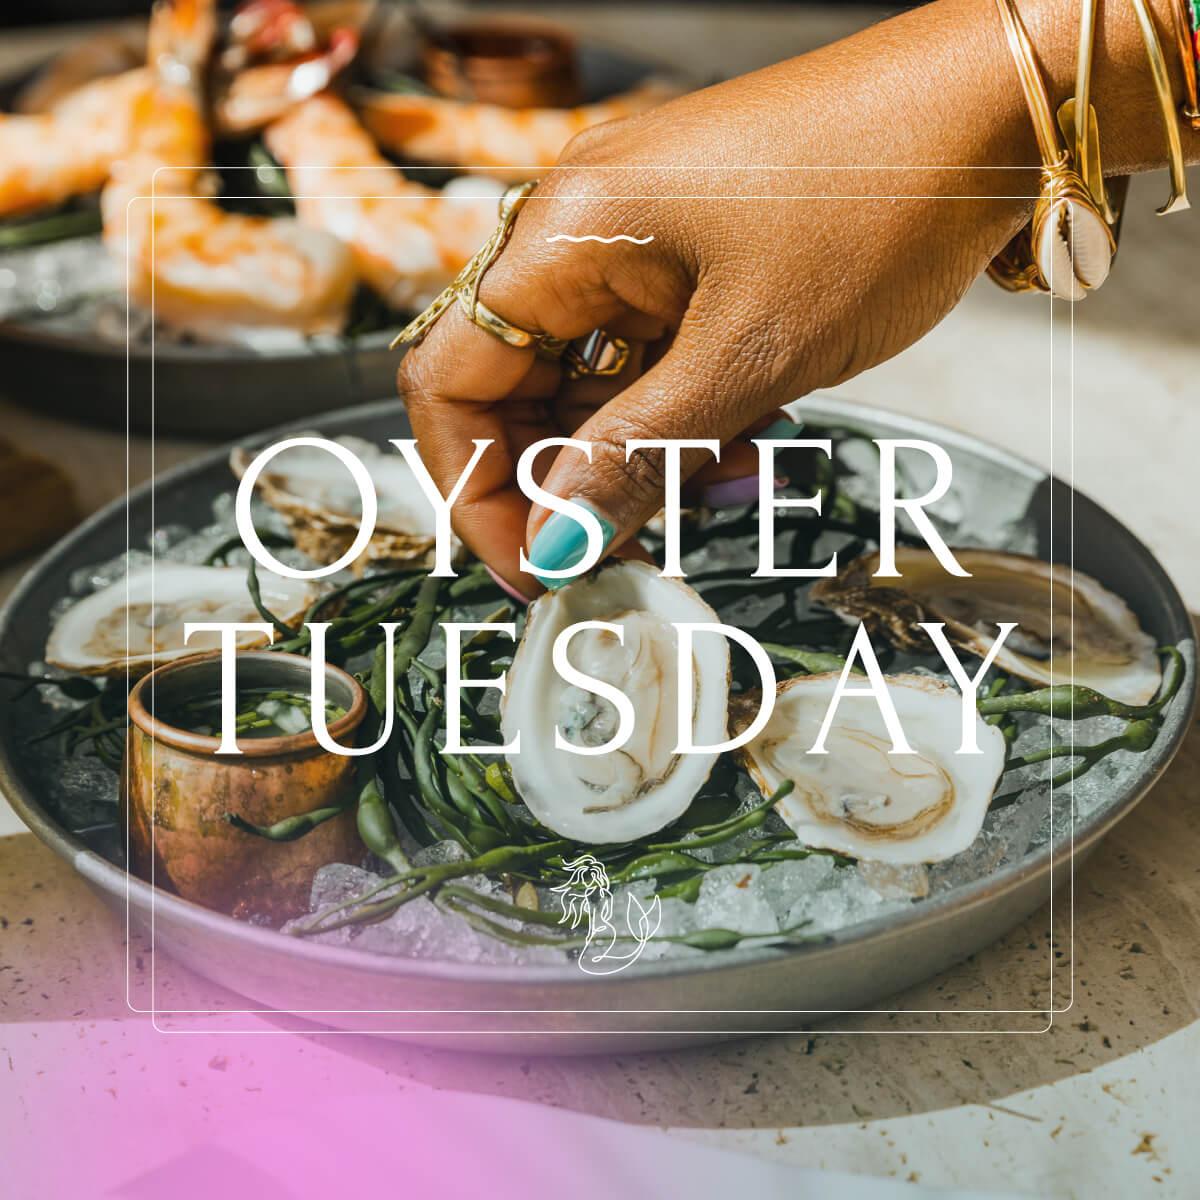 Join Rooftop L.O.A. for Oyster Tuesday!